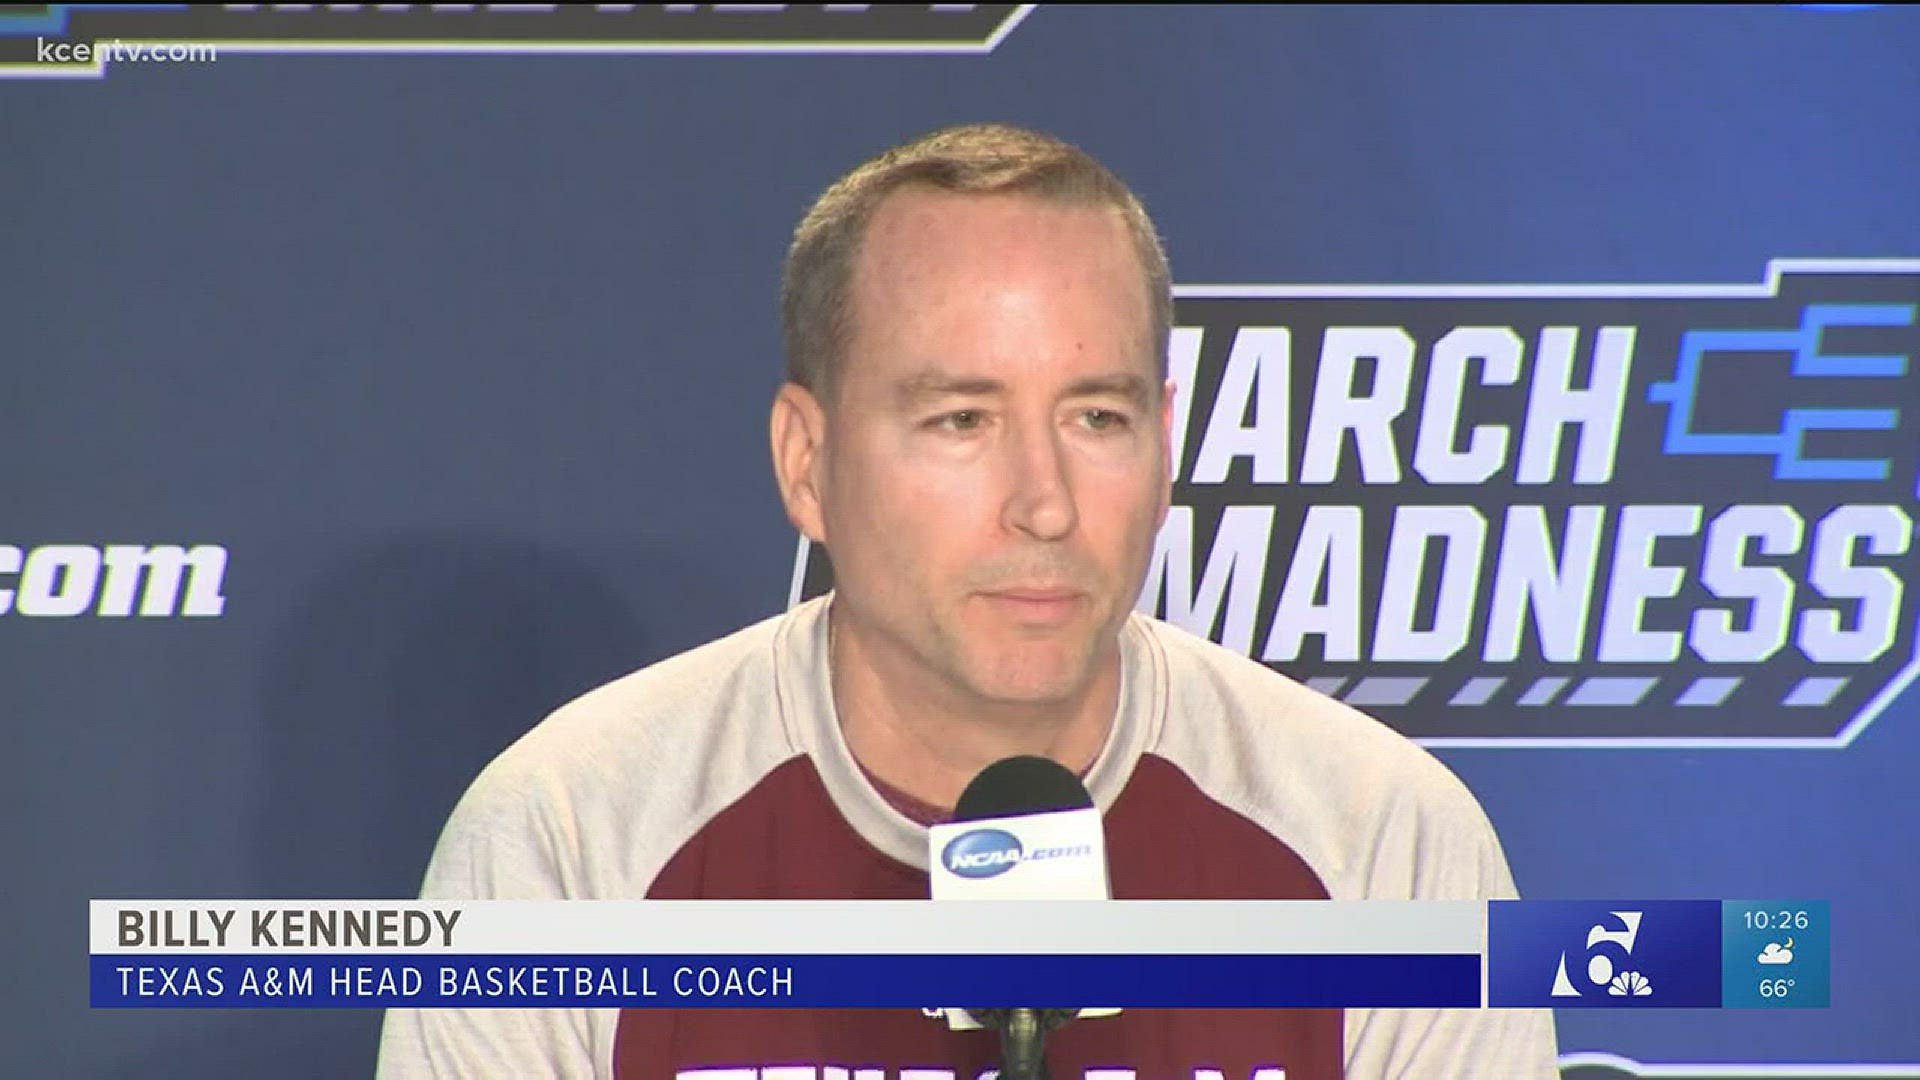 Texas A&M is back in the NCAA Tournament for the 2nd time in the last three years.